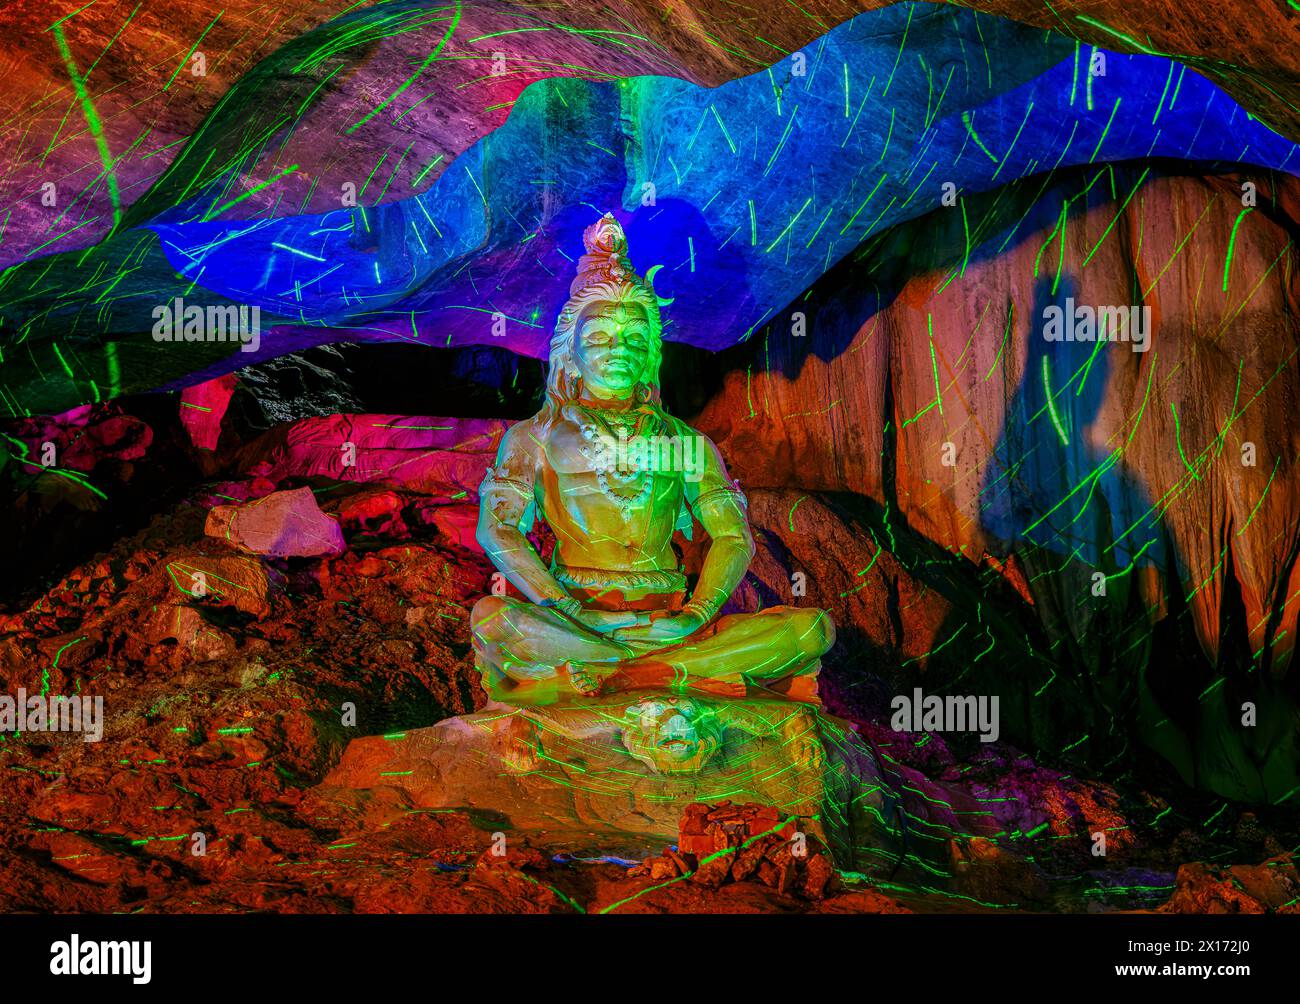 Sri Ramayana Cave temple, Kuala Lumpur, Malaysia, 2024. The cave depicts the story of Rama as a chronicle along the walls of the cave. Stock Photo